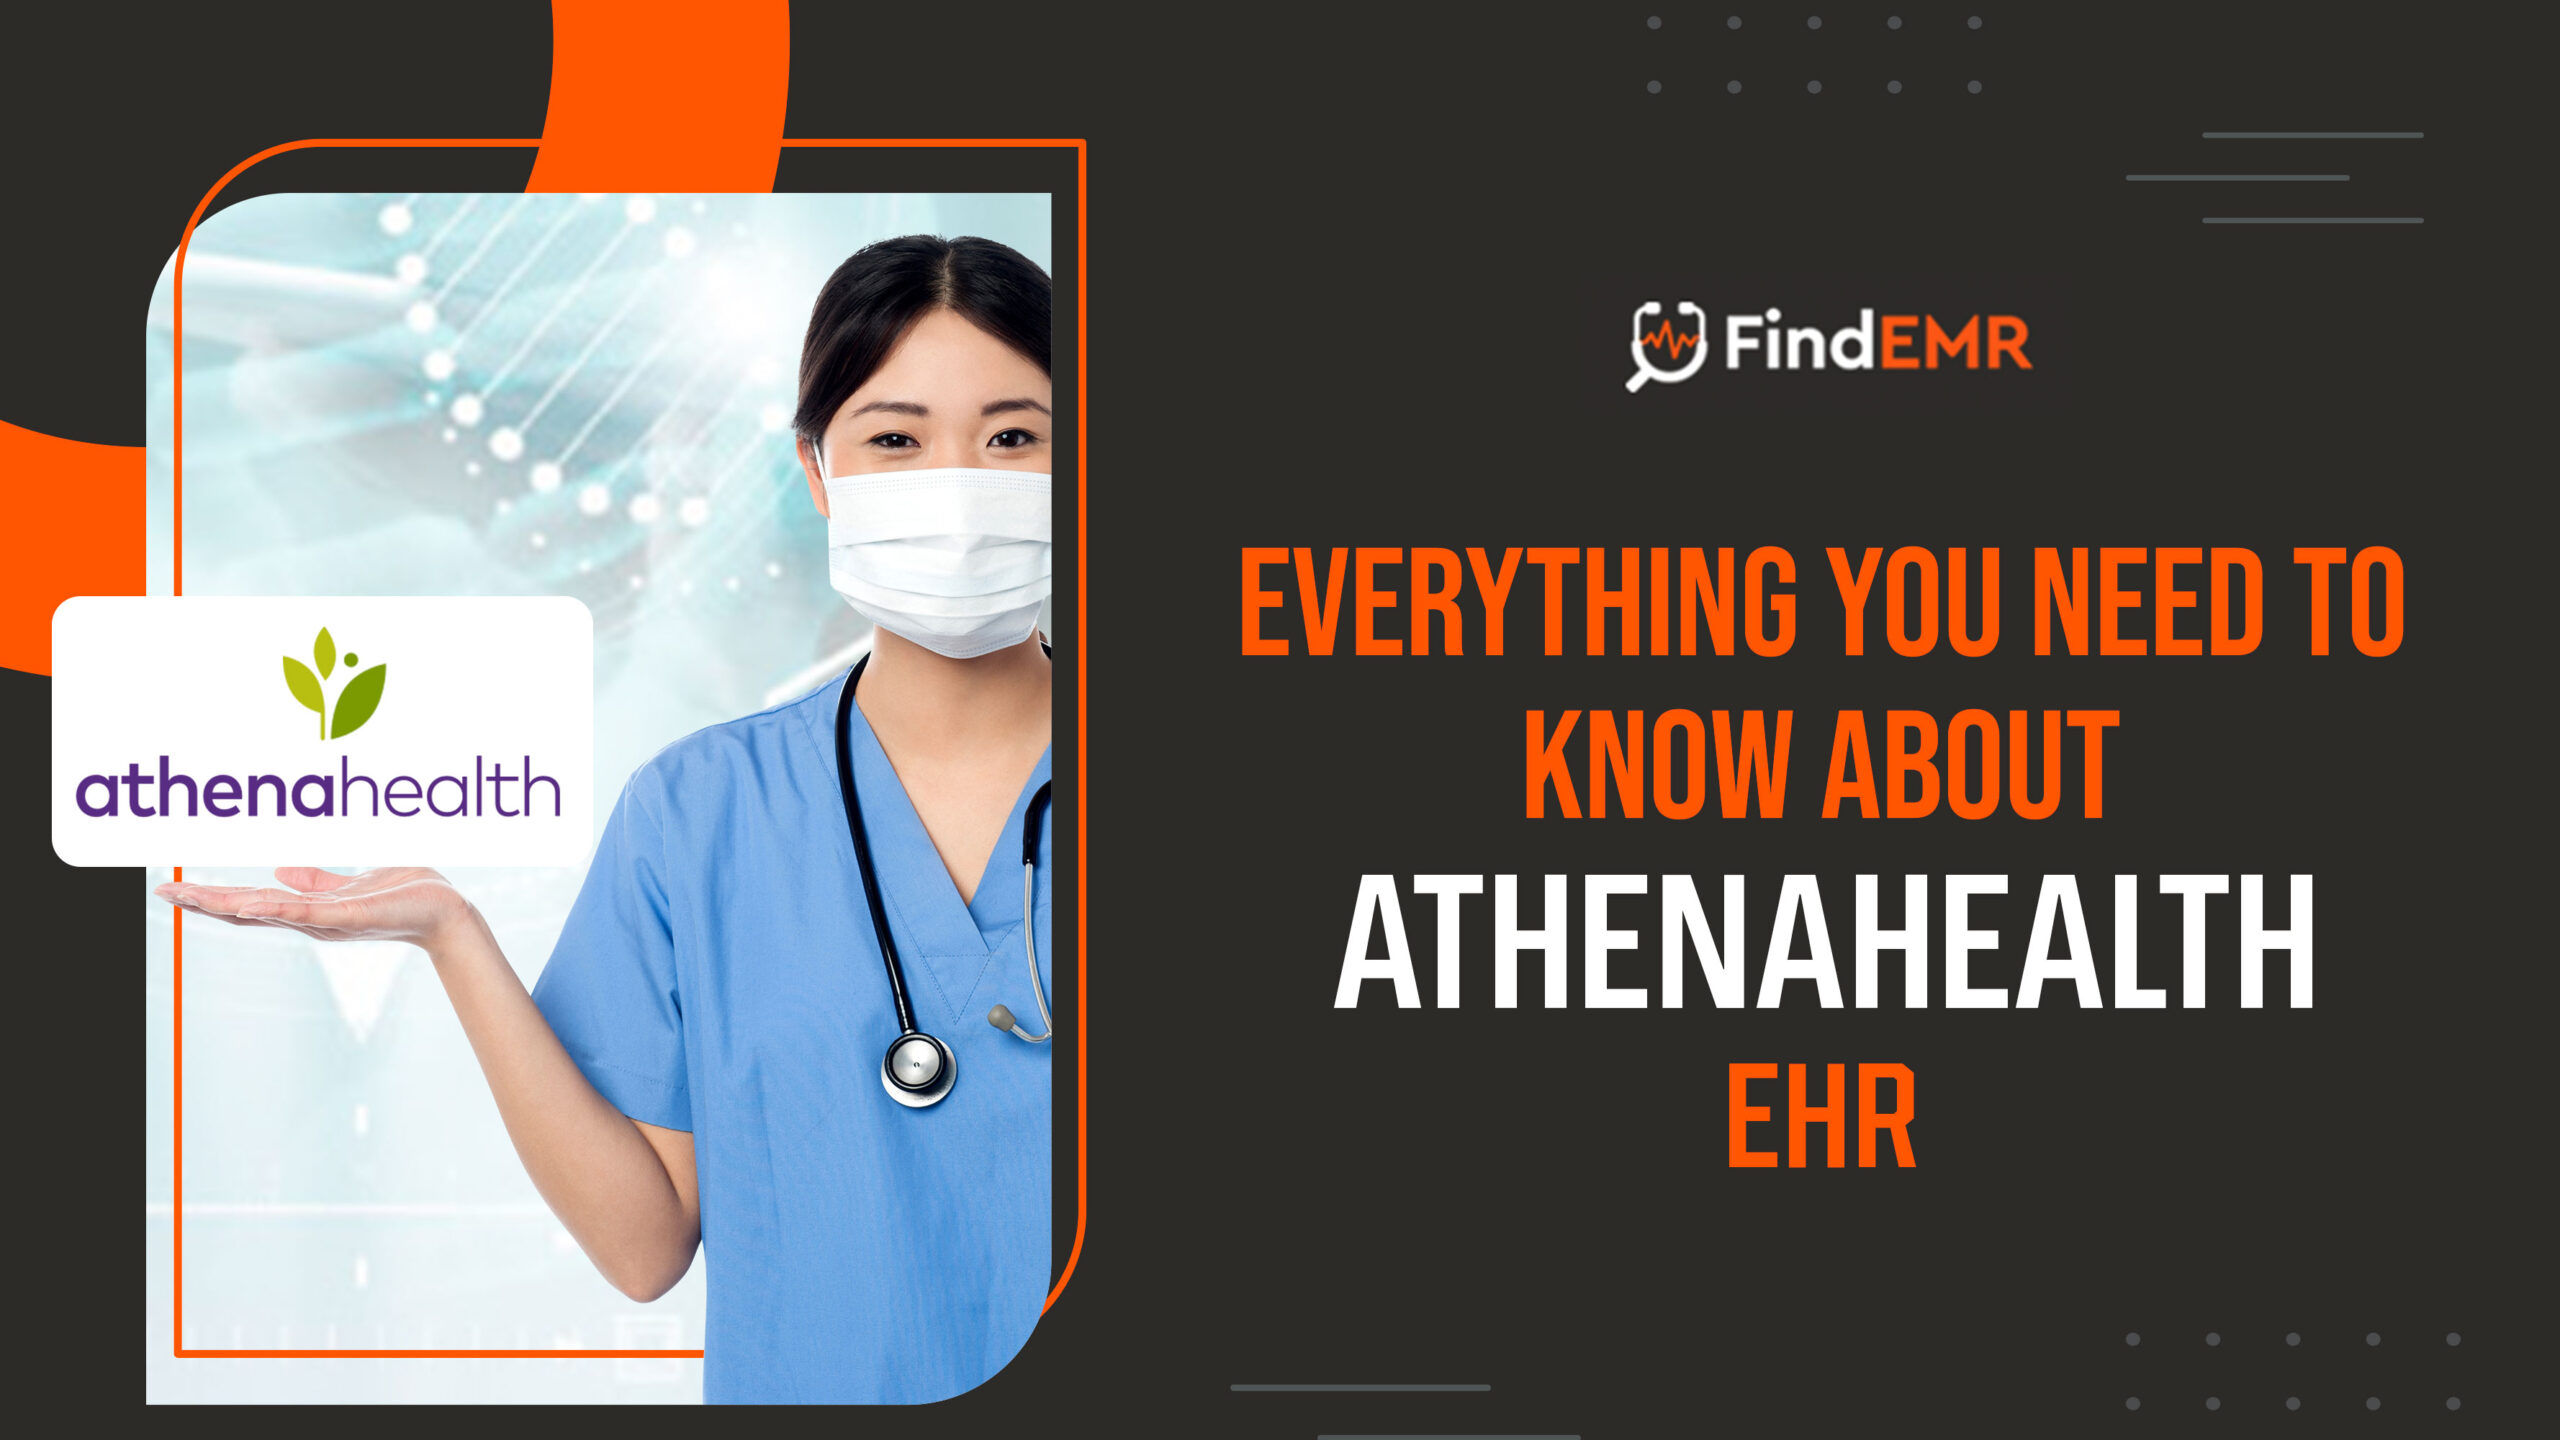 Everything you need to know about athenahealth EHR